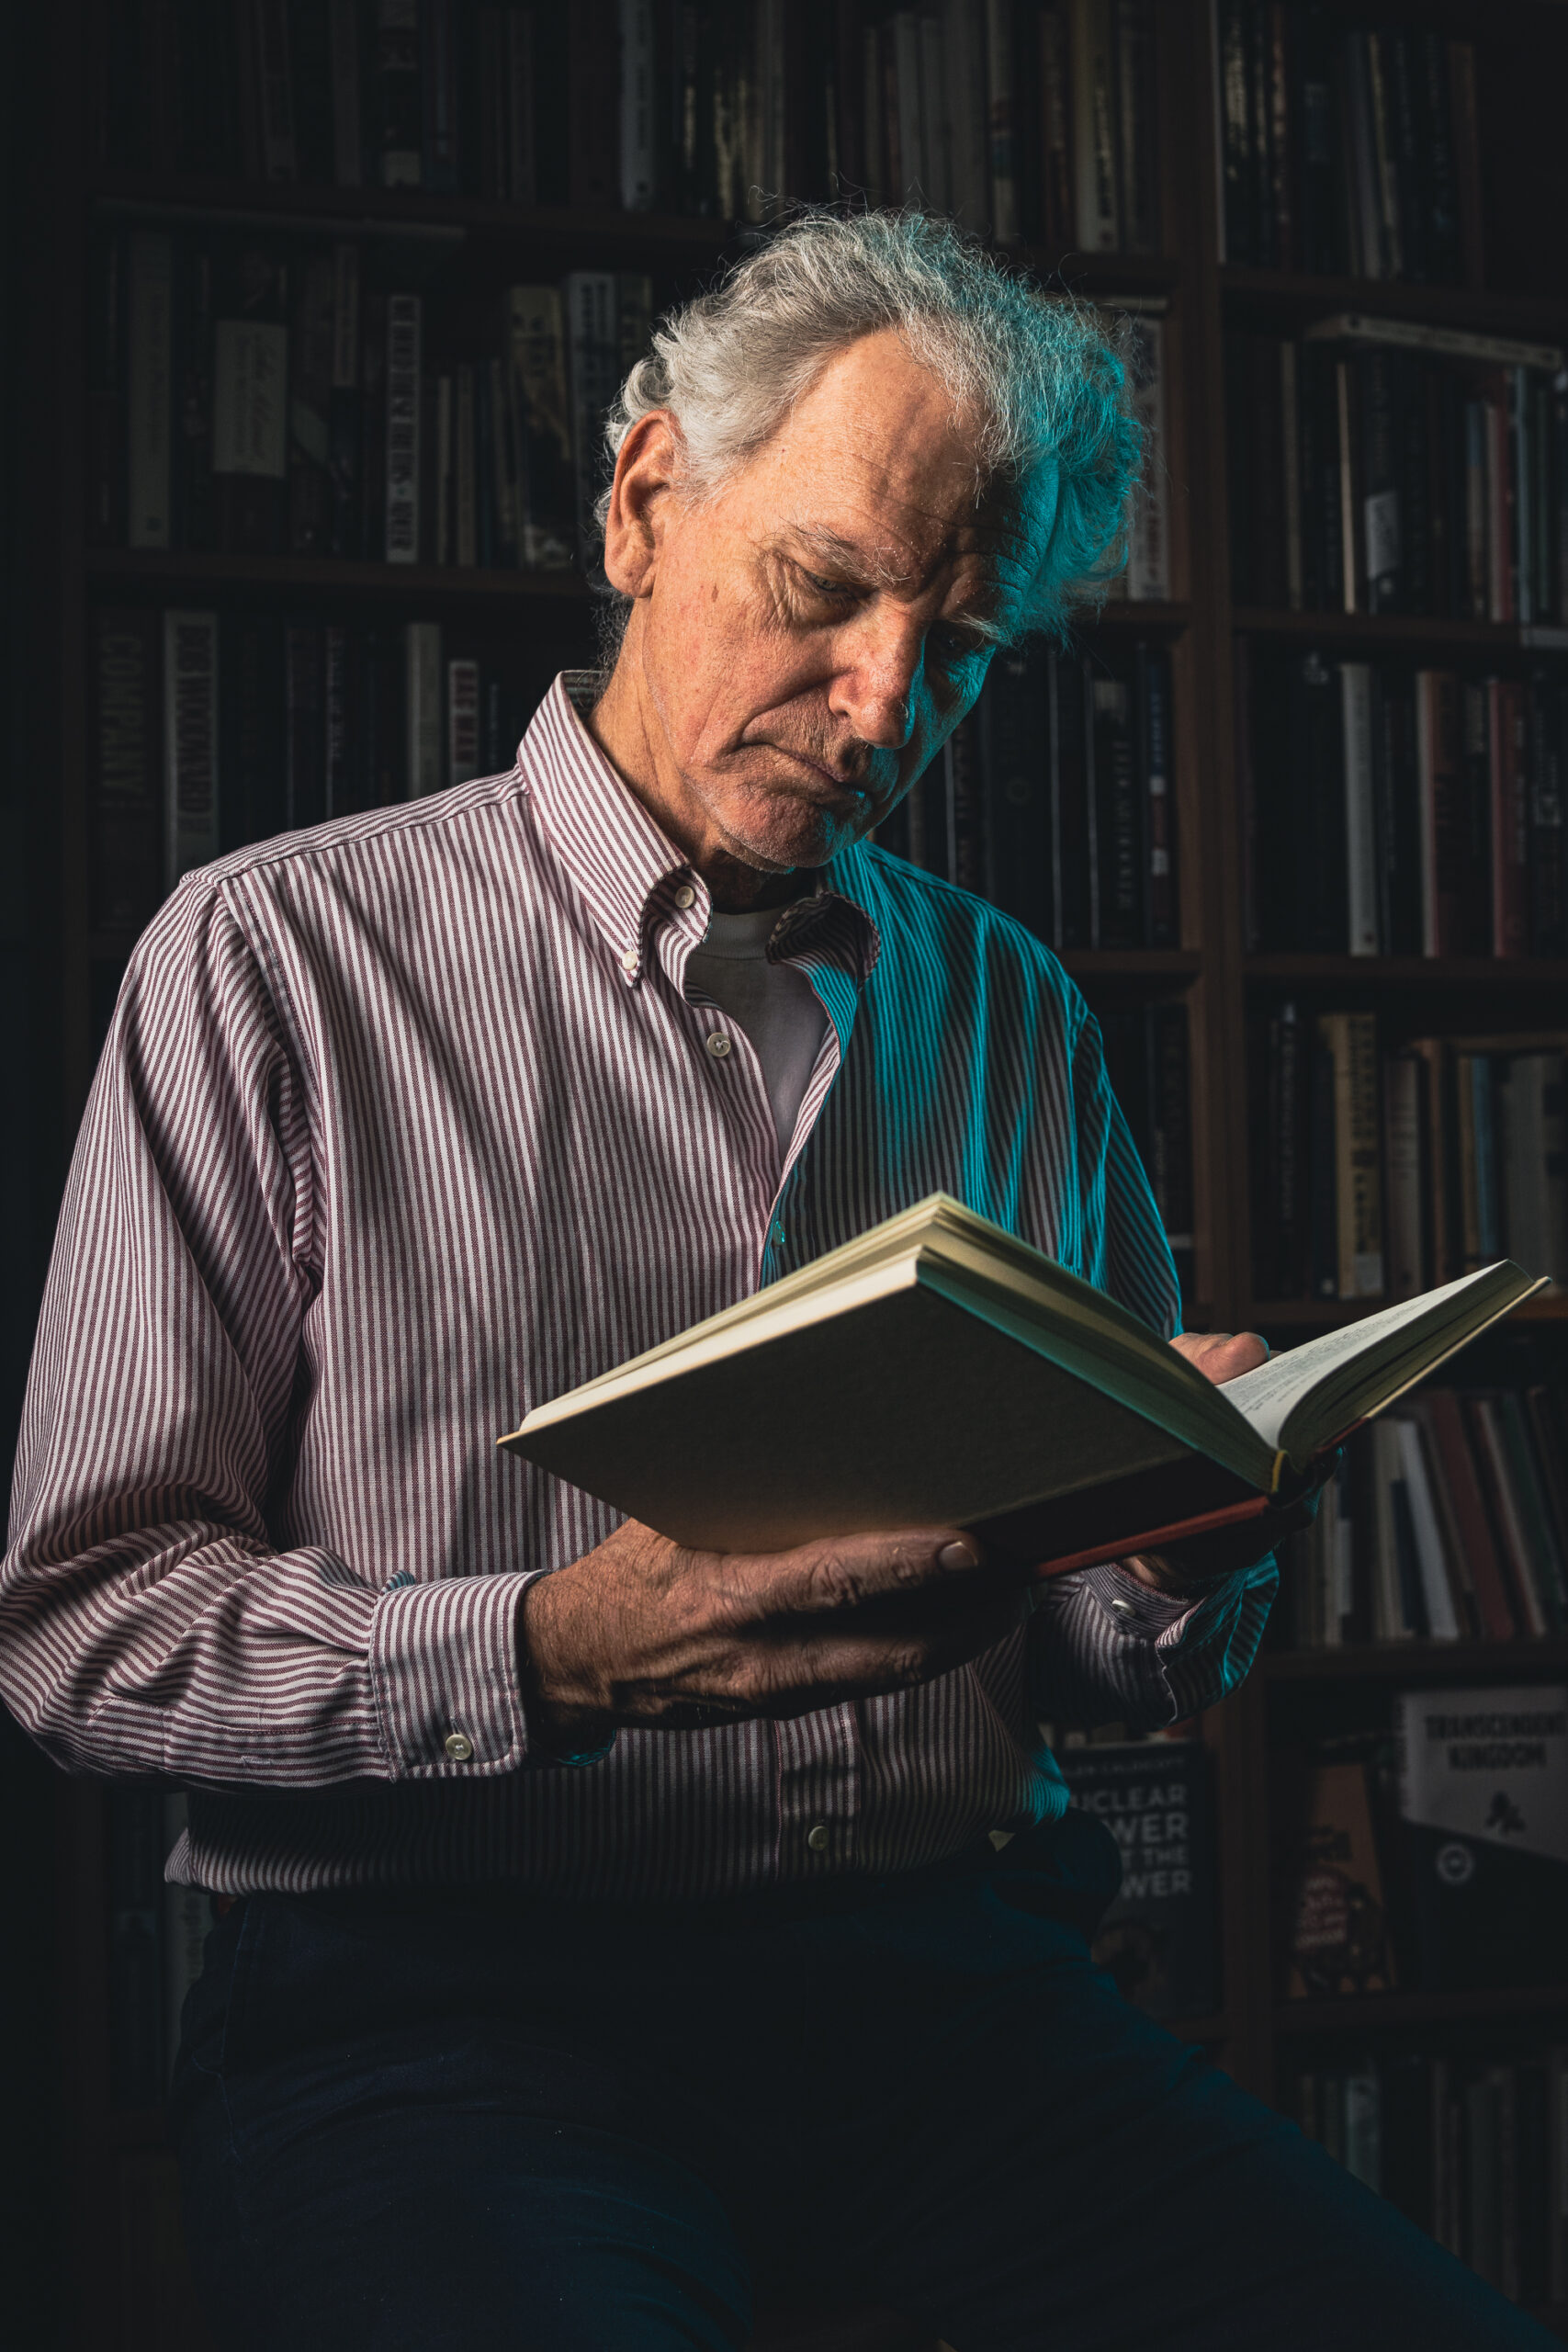 Older man in light colored collared shirt reads a book in front of darkened library shelf while he is bathed in warm light on one side and turquoise light from the opposite side.